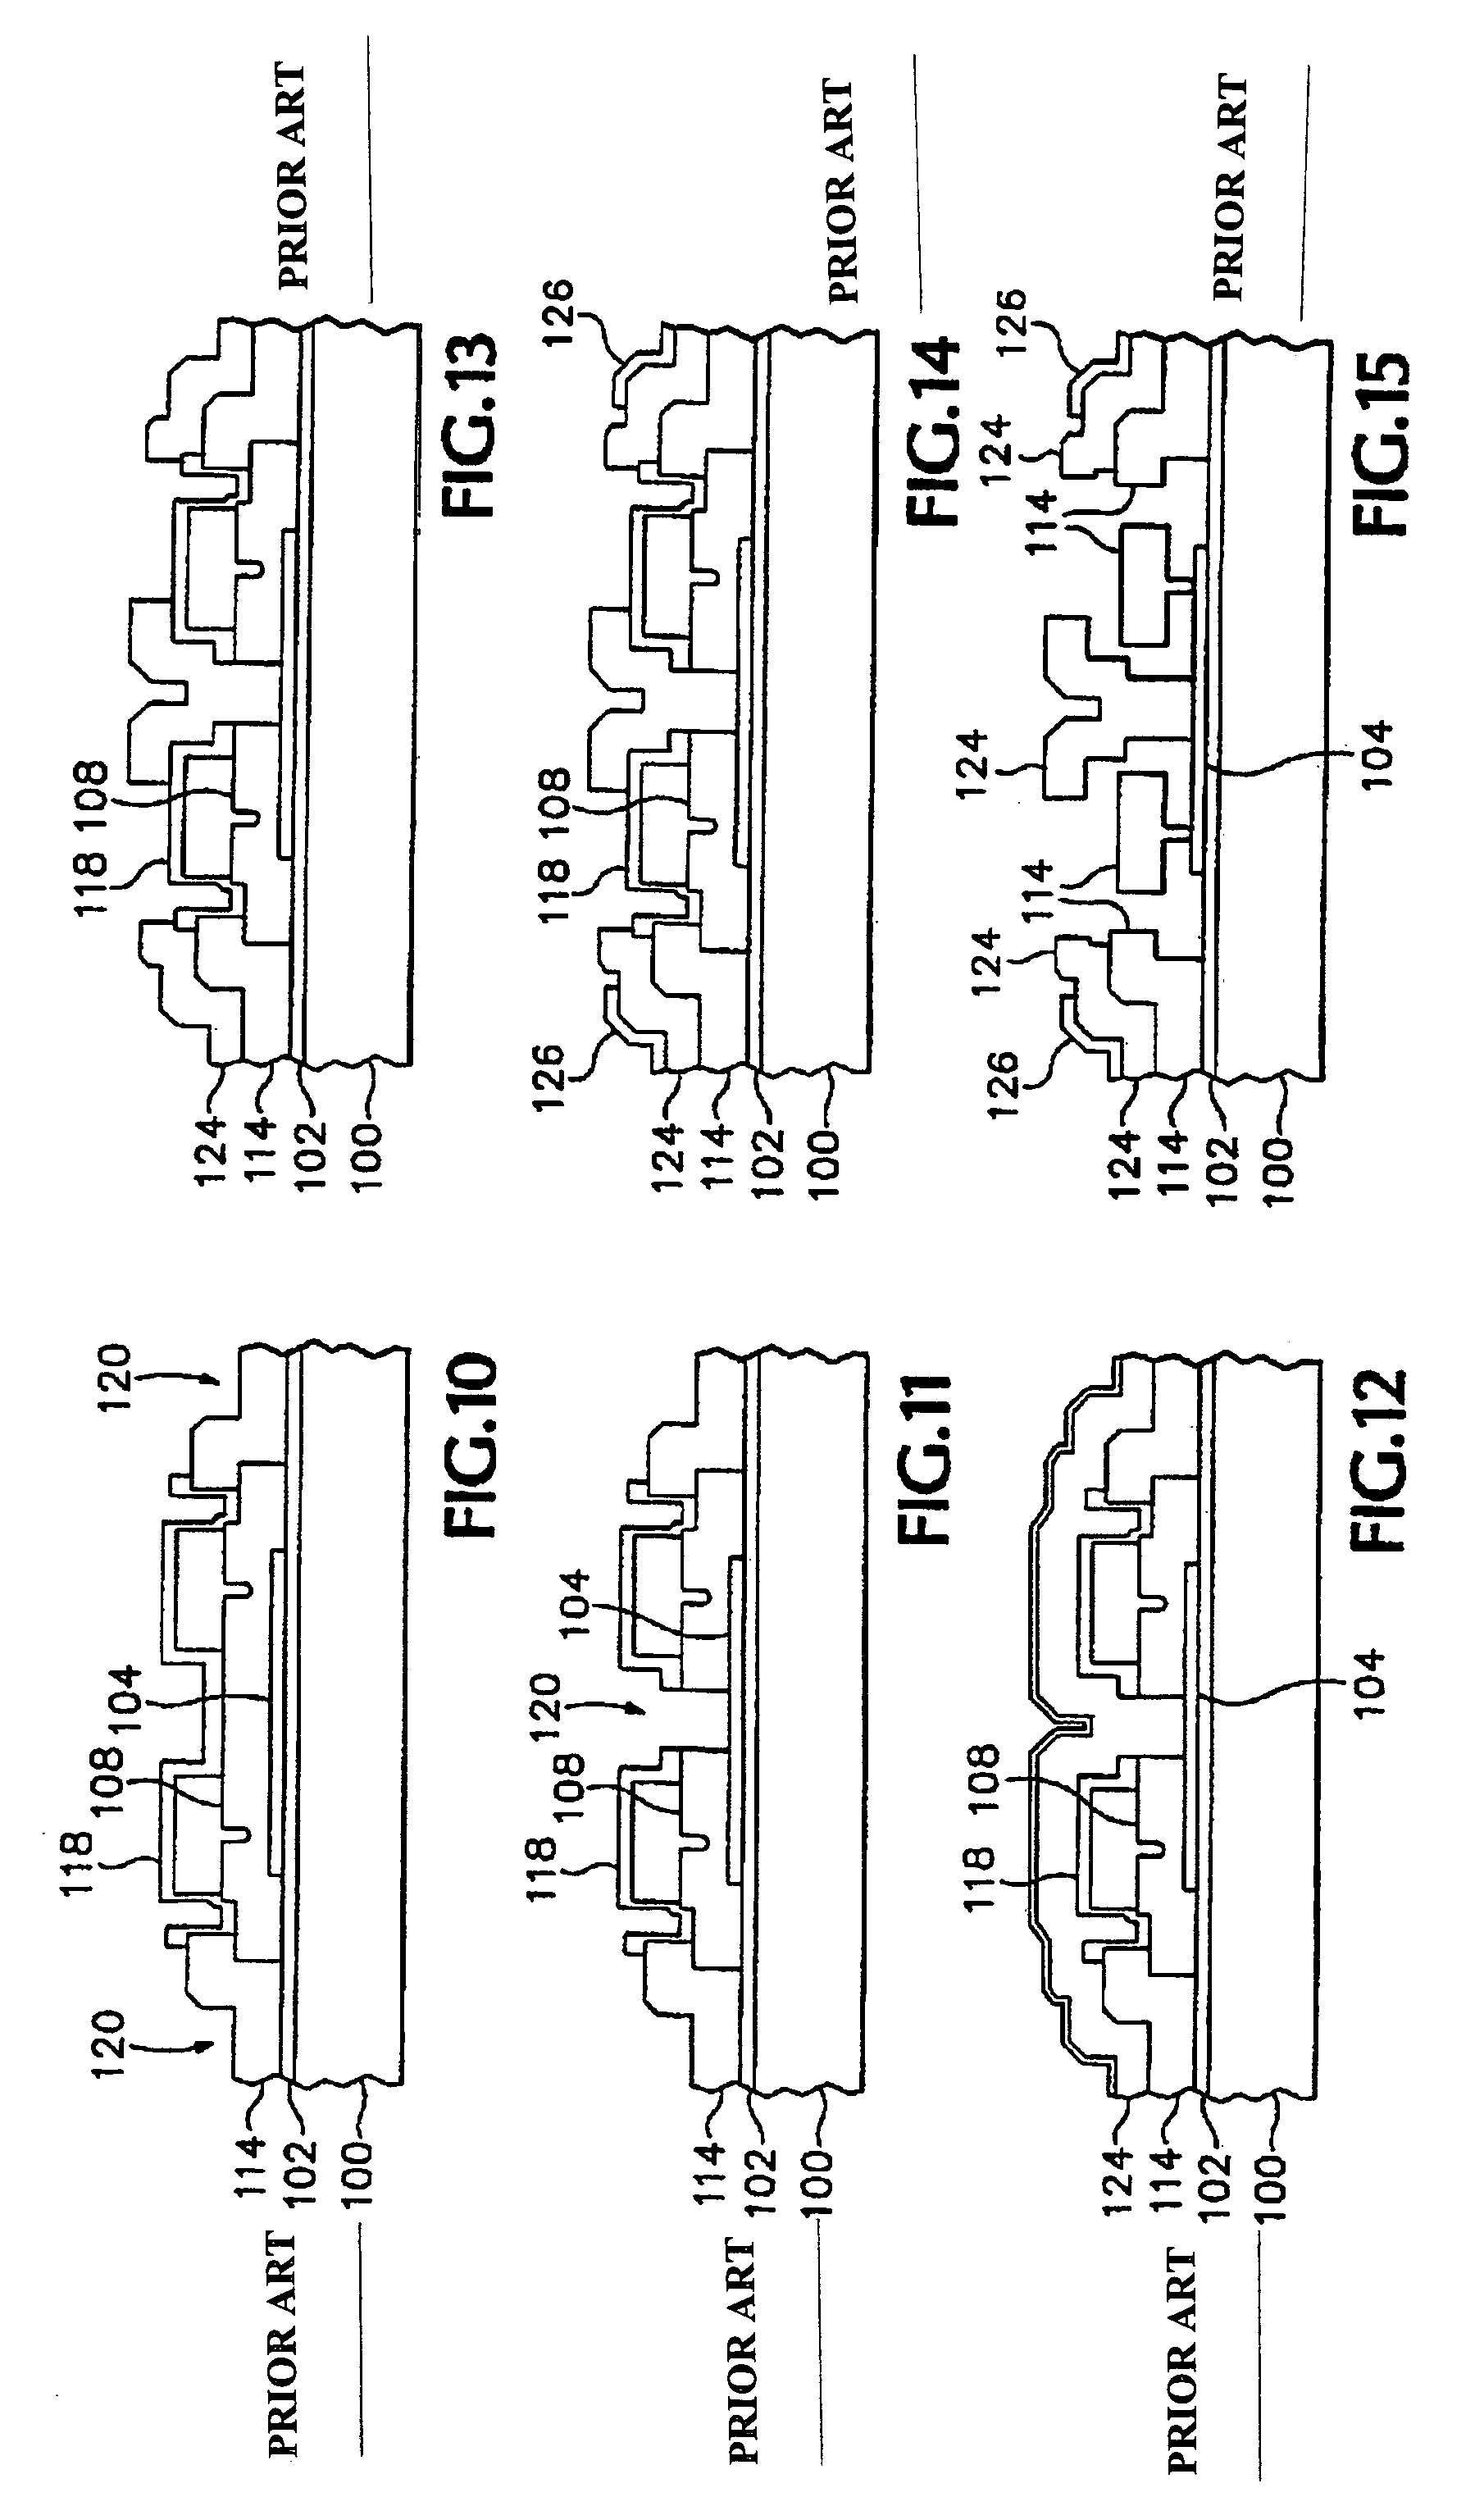 Magnetically actuated microelectrochemical systems actuator